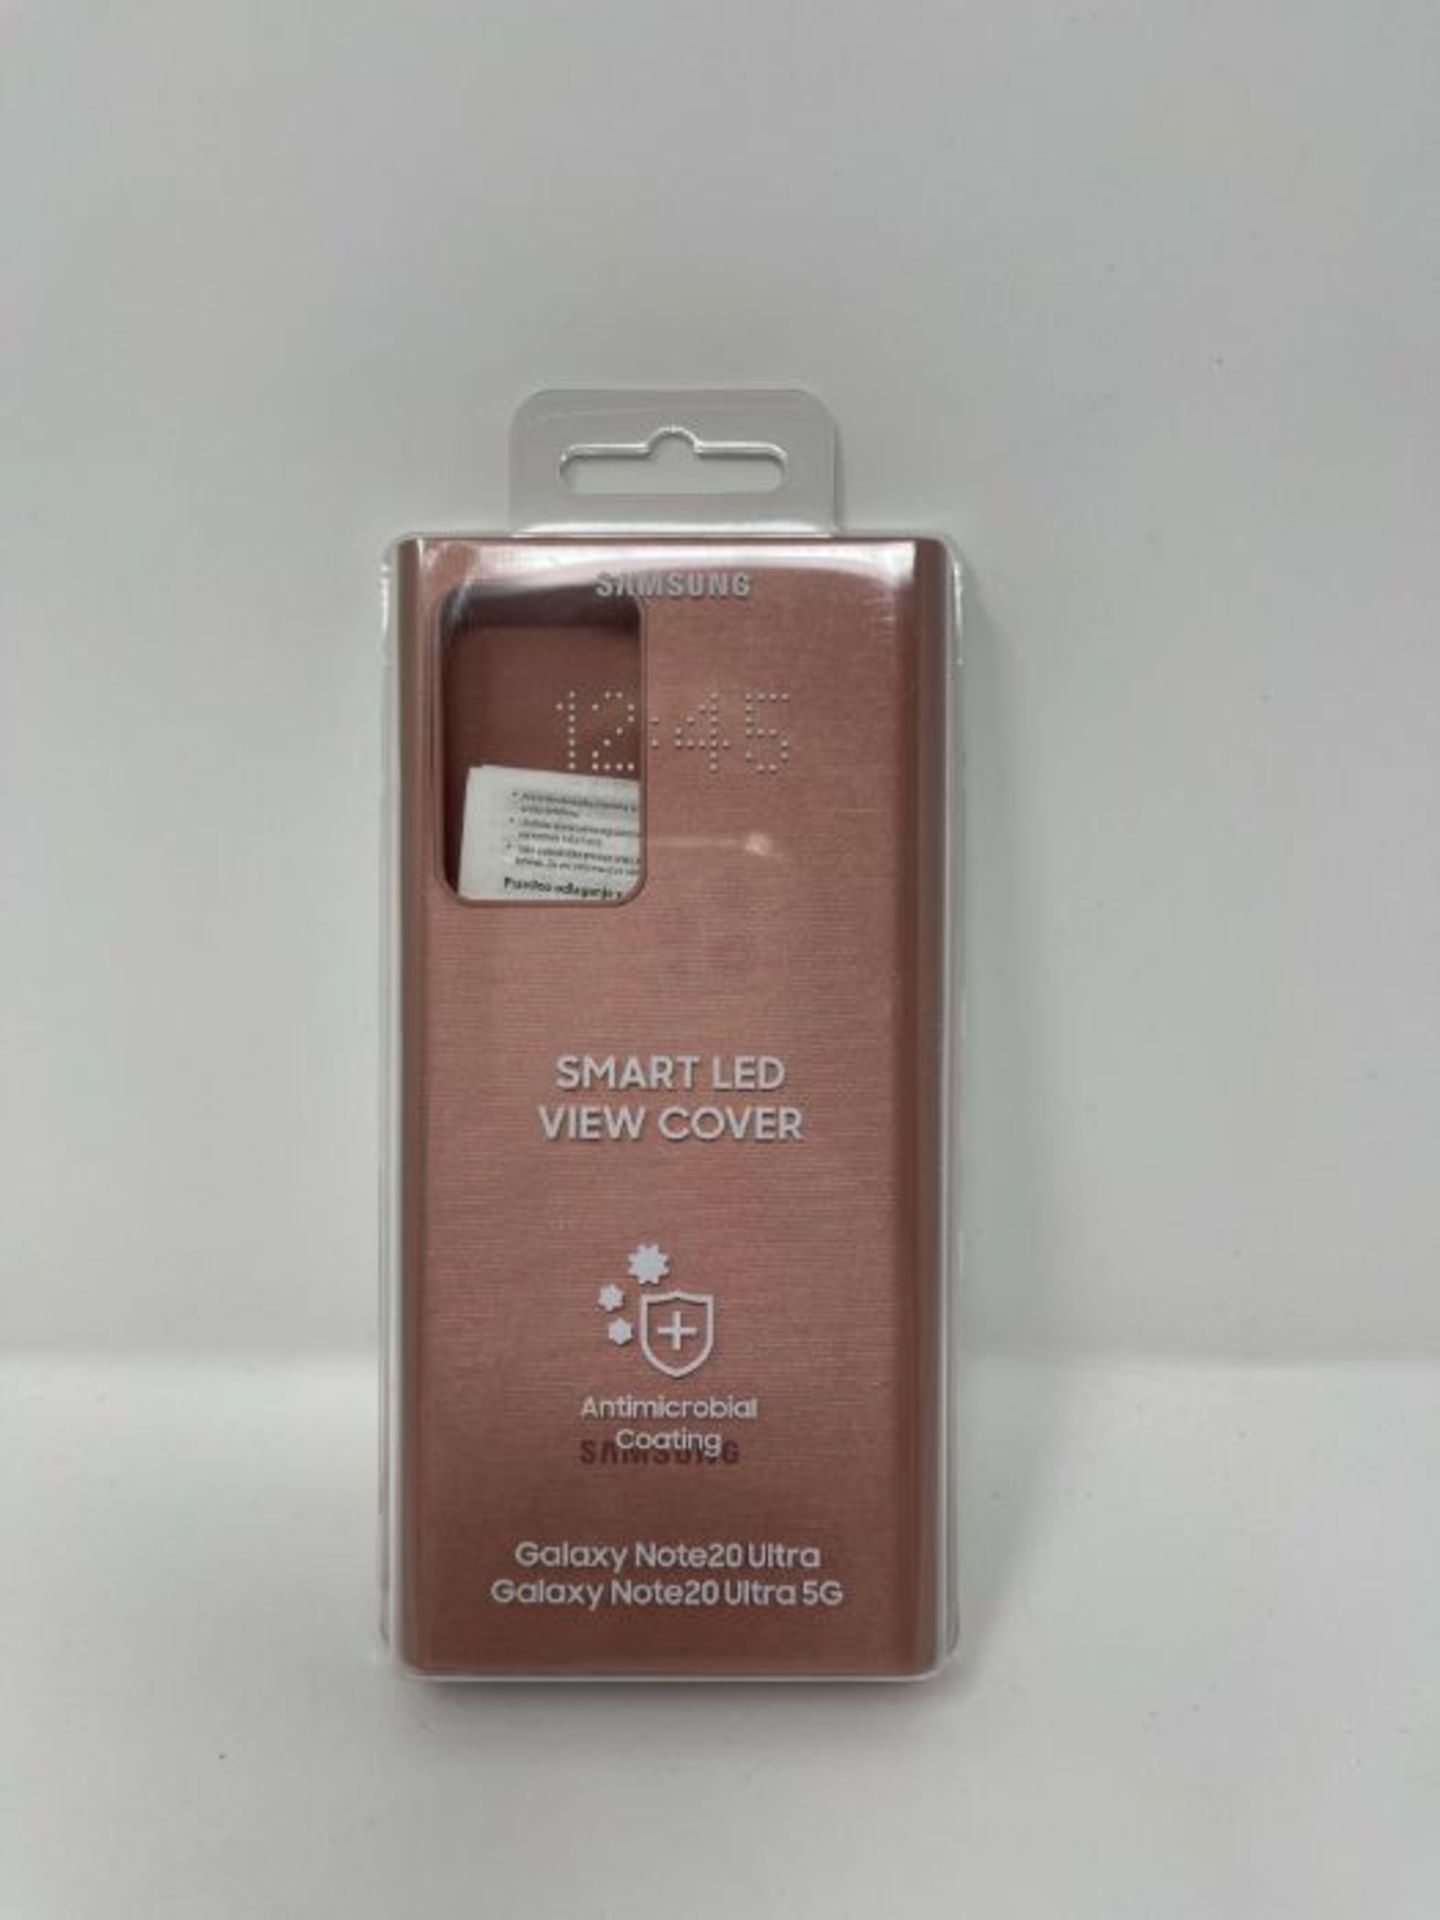 Samsung Note20 Ultra LED View cover, Copper Brown - Image 2 of 2